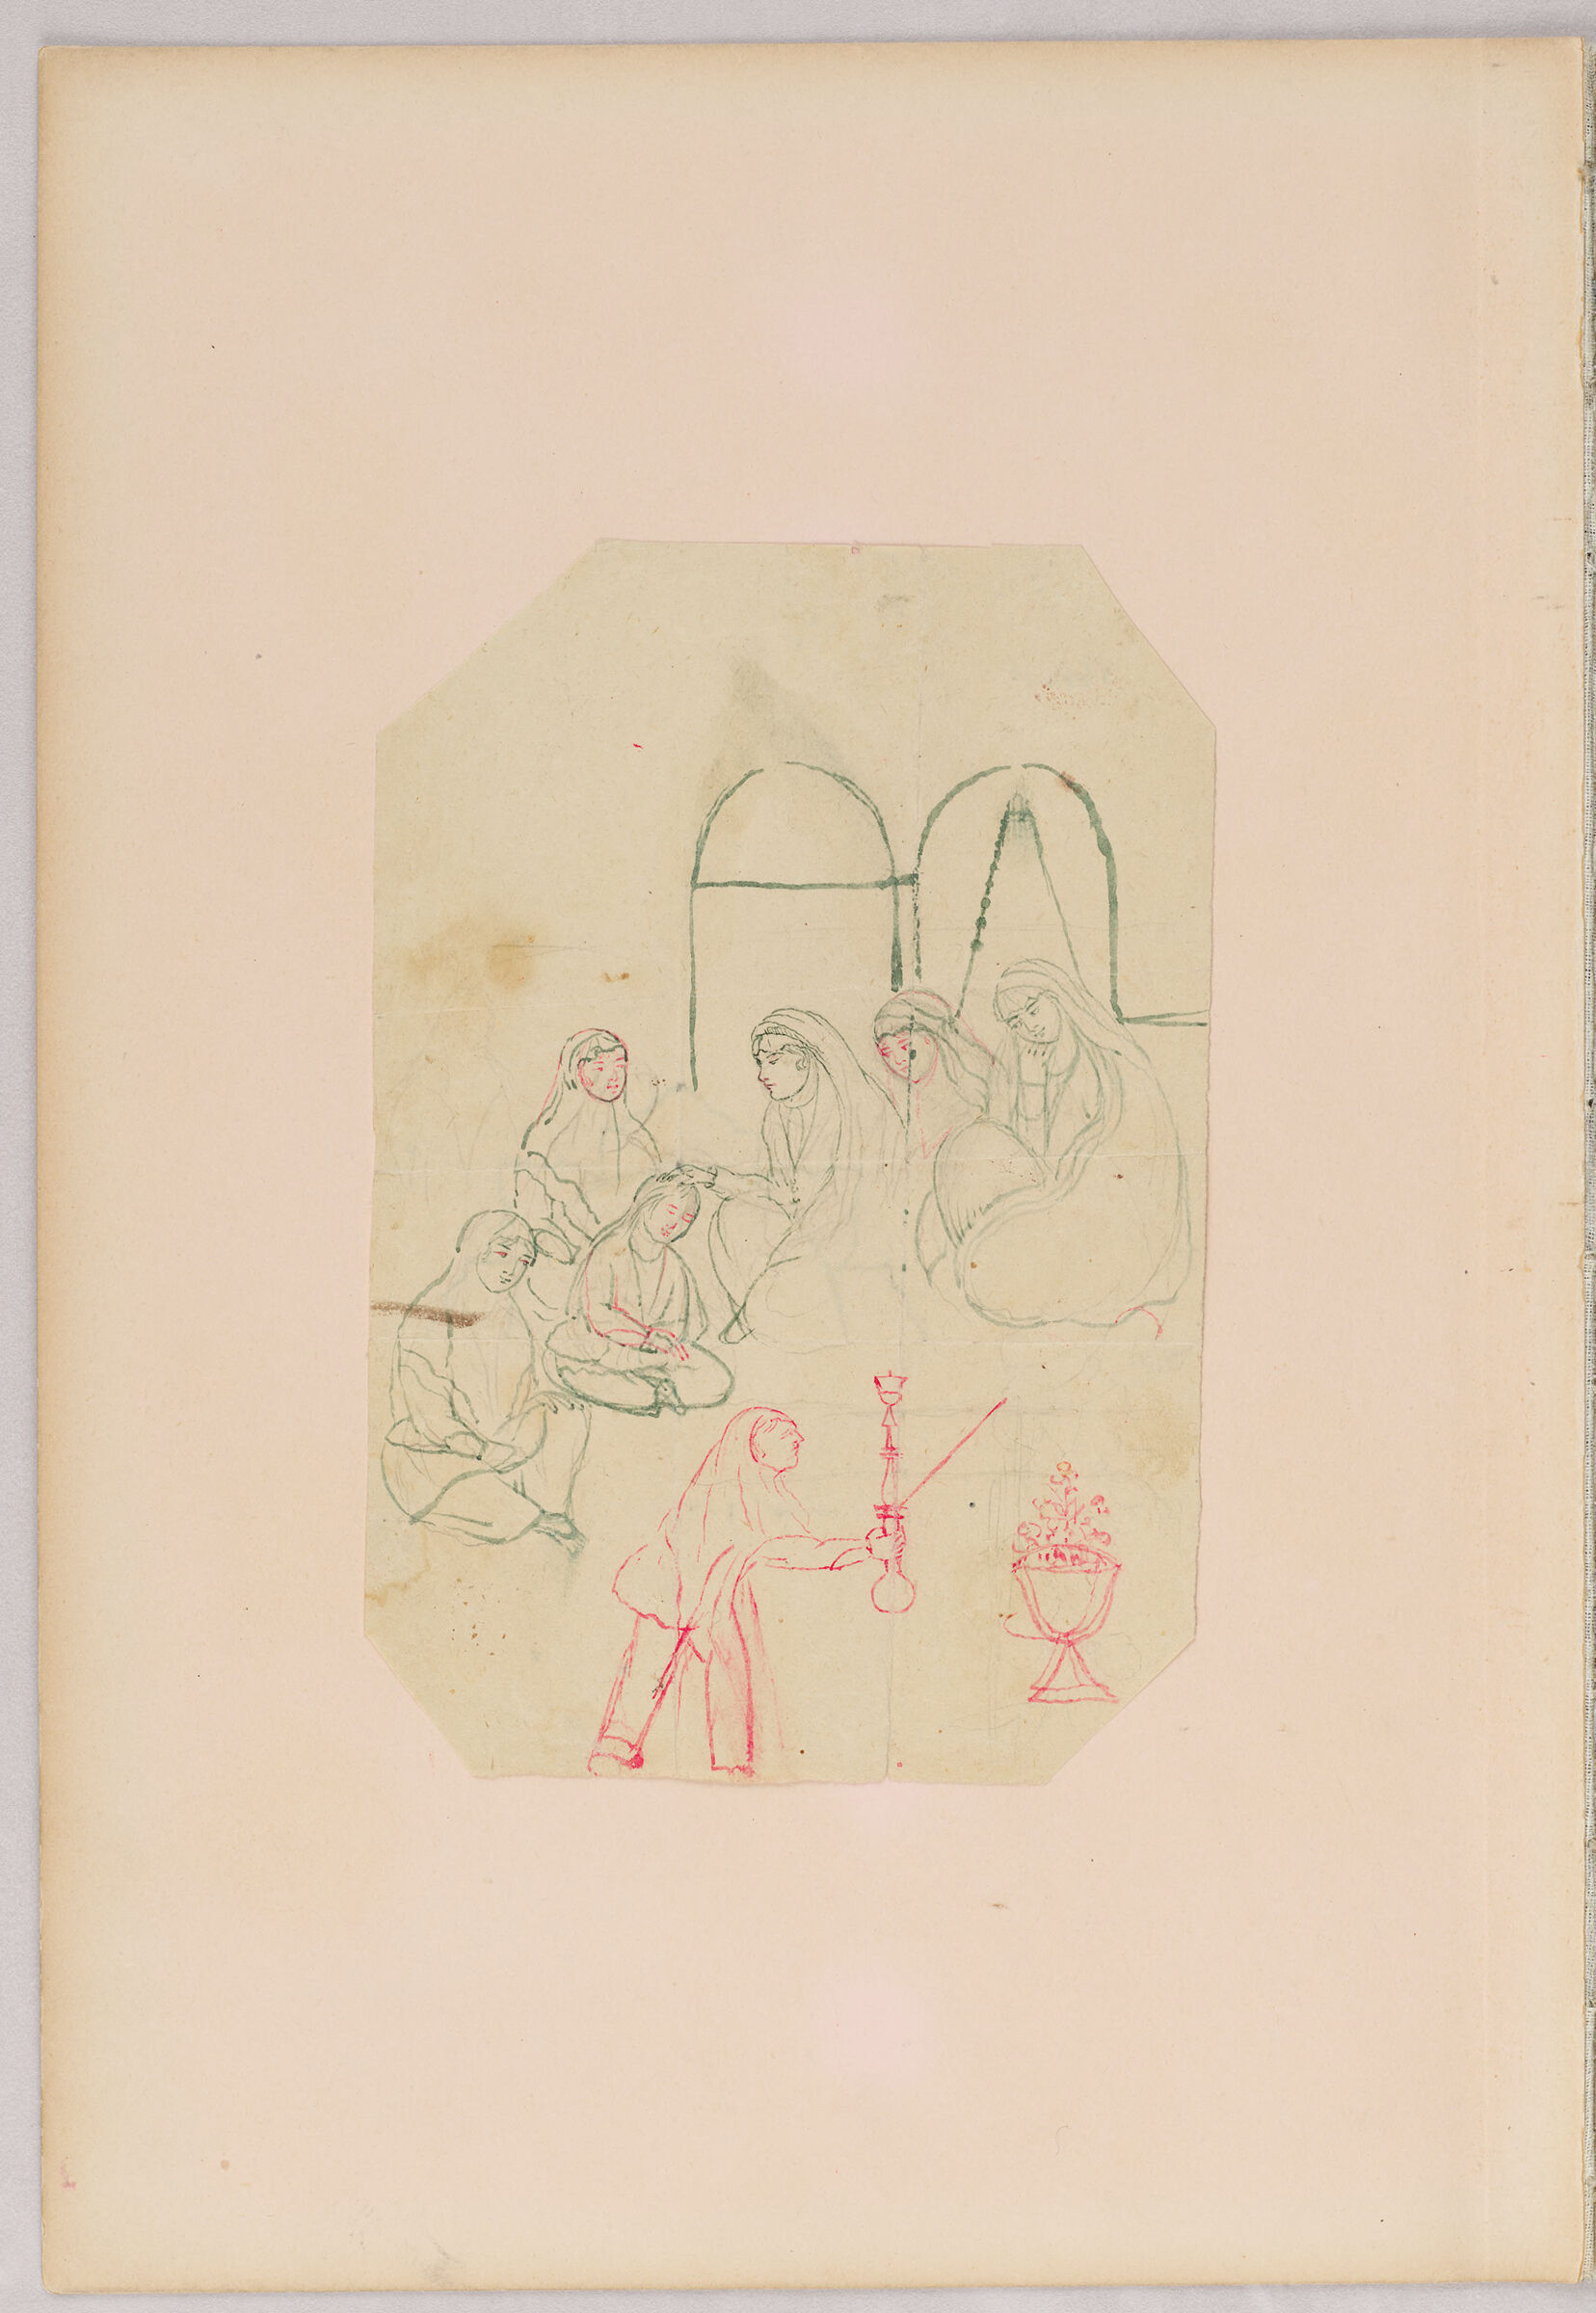 Folio 28 From An Album Of Drawings And Paintings: Domestic Scene With Women And Child (Recto); Three Sheets: Female Musician Playing Bowed Instrument; Embracing Couple; Man Hawking On Horseback (Verso)